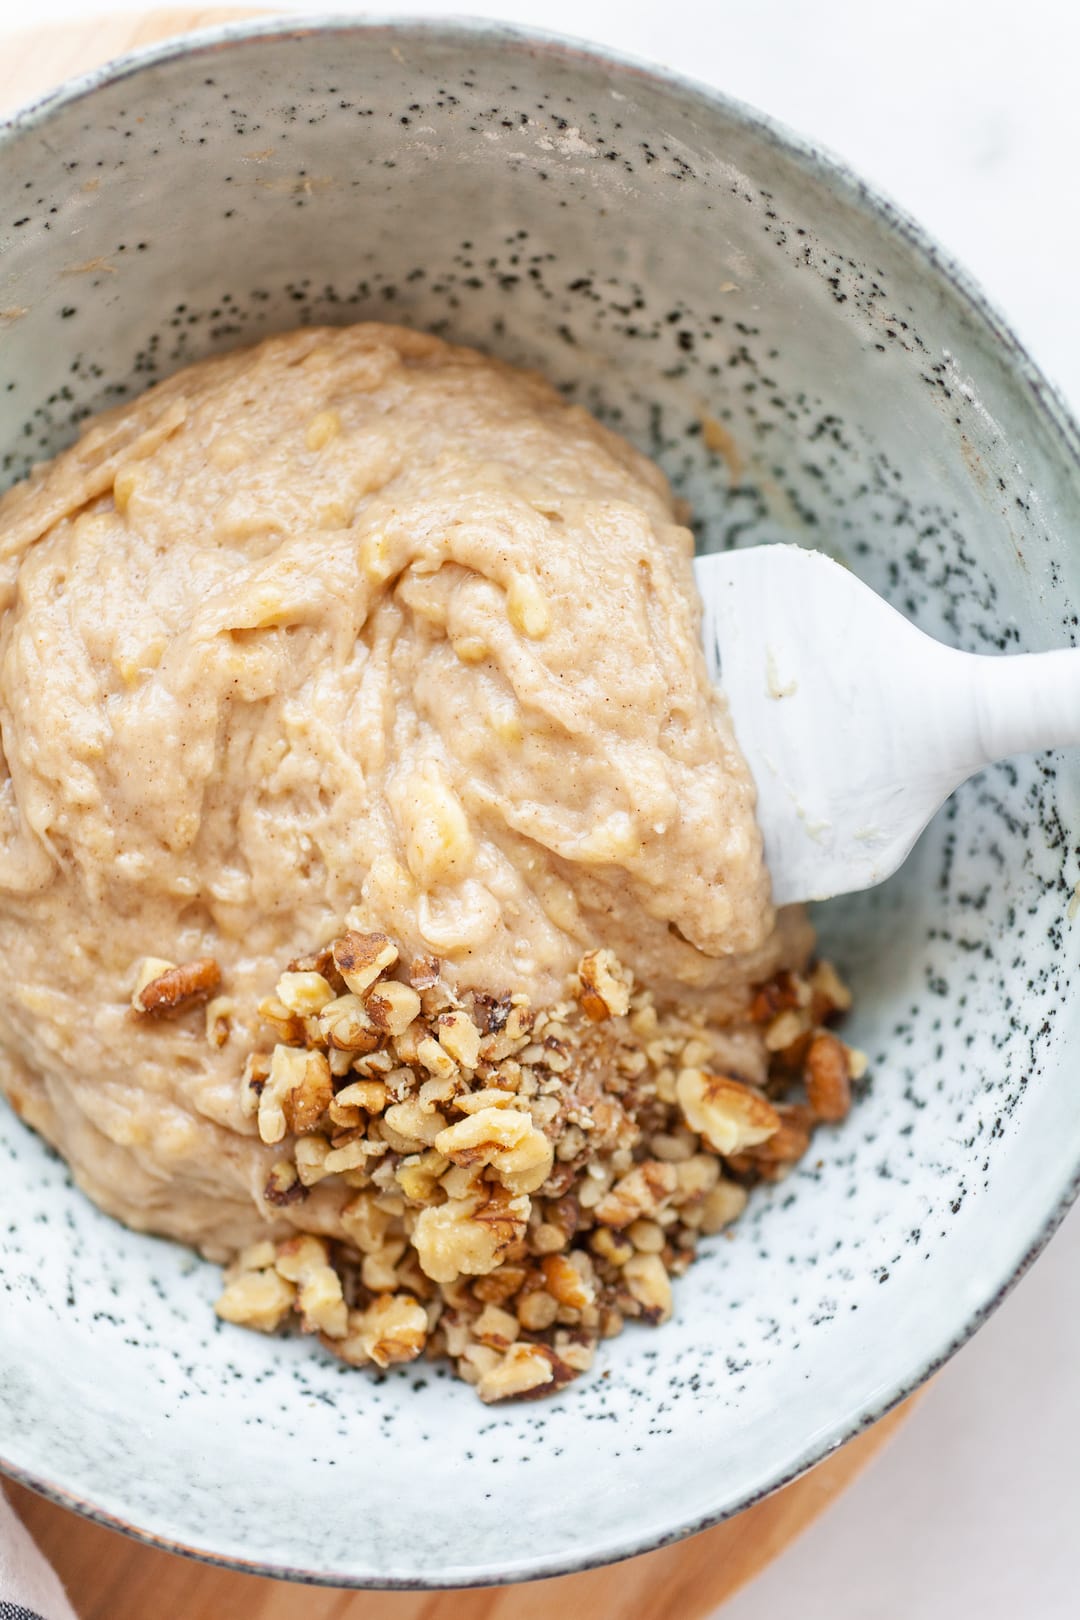 Instant Pot Banana Bread batter in a bowl with walnuts and a white spatula